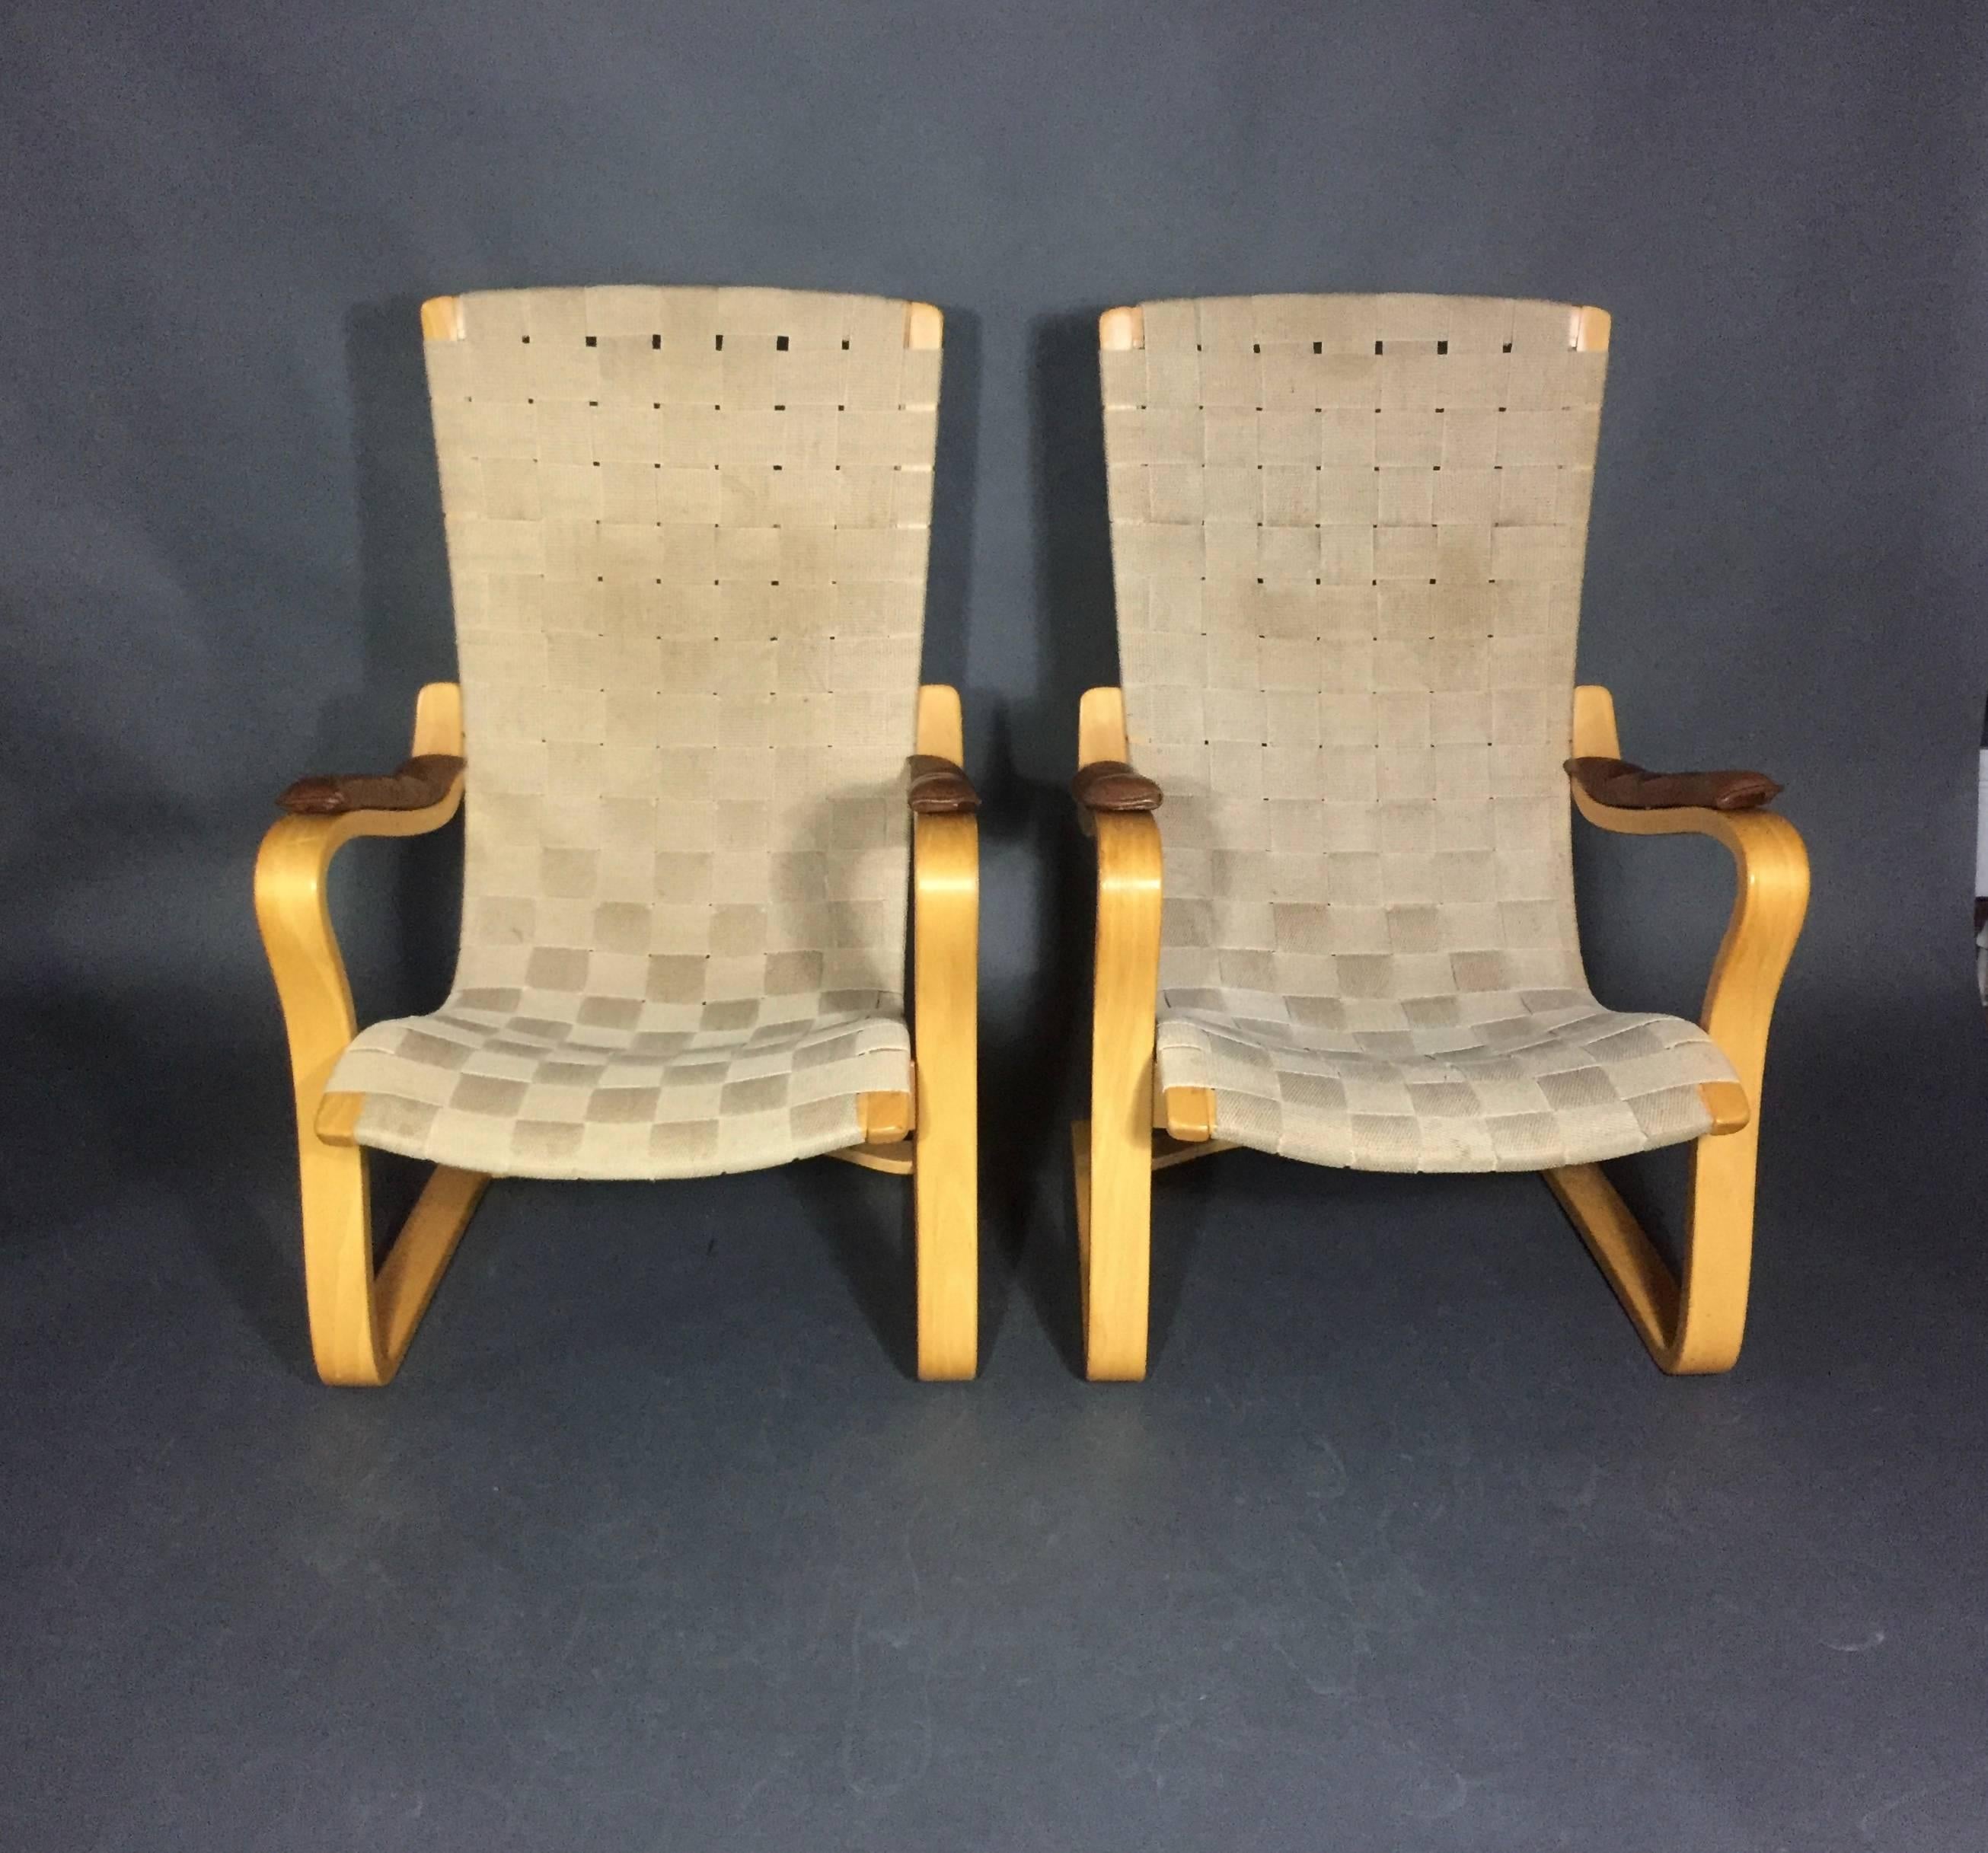 The original model Patronen was created in the 1940s by Gustaf Axel Berg. This later production in laminated birch bentwood was made in 1970s for Bröderna Andersson with original hemp webbing and sculpted leather armrests. Each chair marked at back